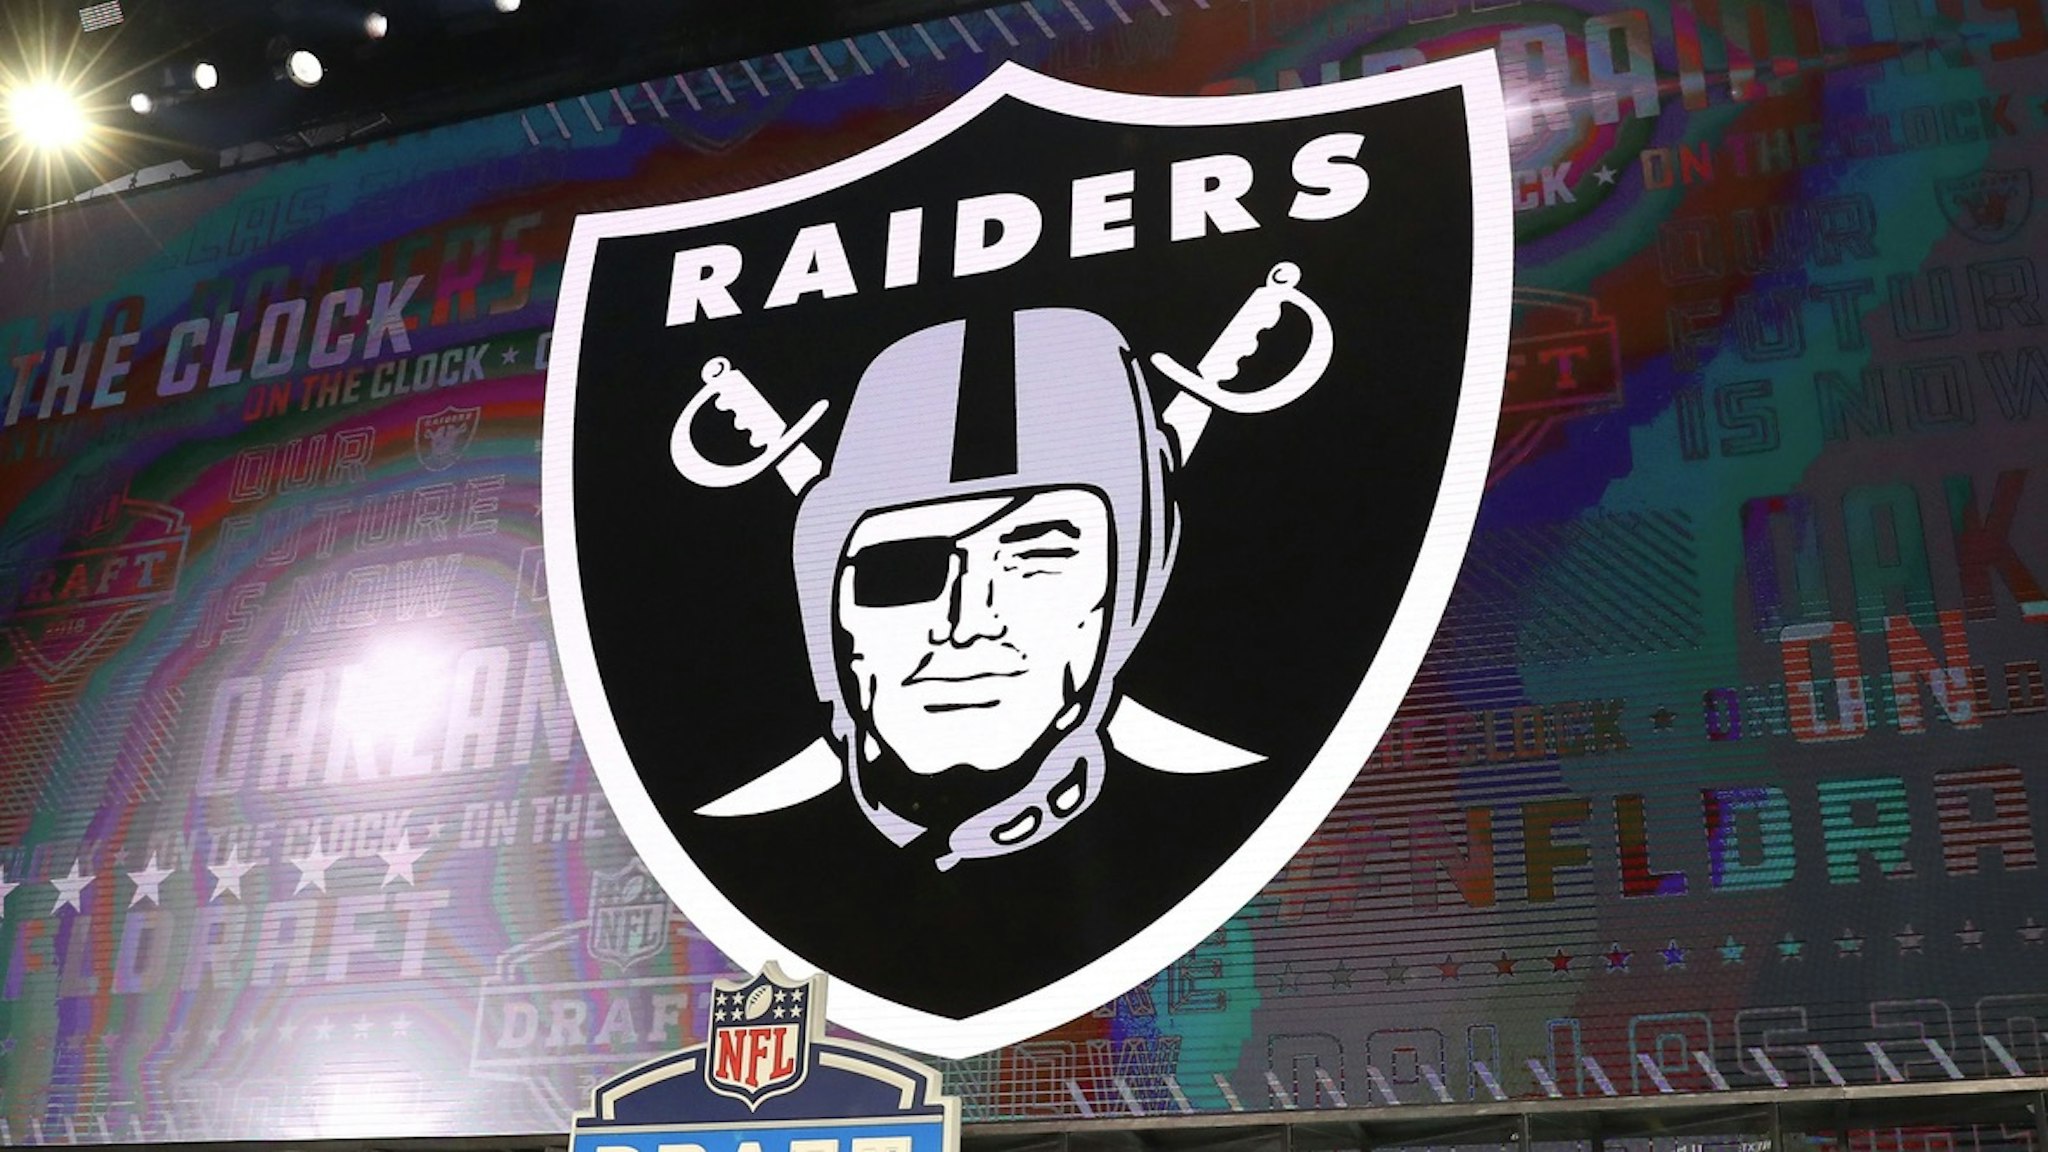 ARLINGTON, TX - APRIL 26: The Los Angeles Raiders logo on the video board during the first round at the 2018 NFL Draft at AT&T Statium on April 26, 2018 at AT&T Stadium in Arlington Texas. (Photo by Rich Graessle/Icon Sportswire via Getty Images)